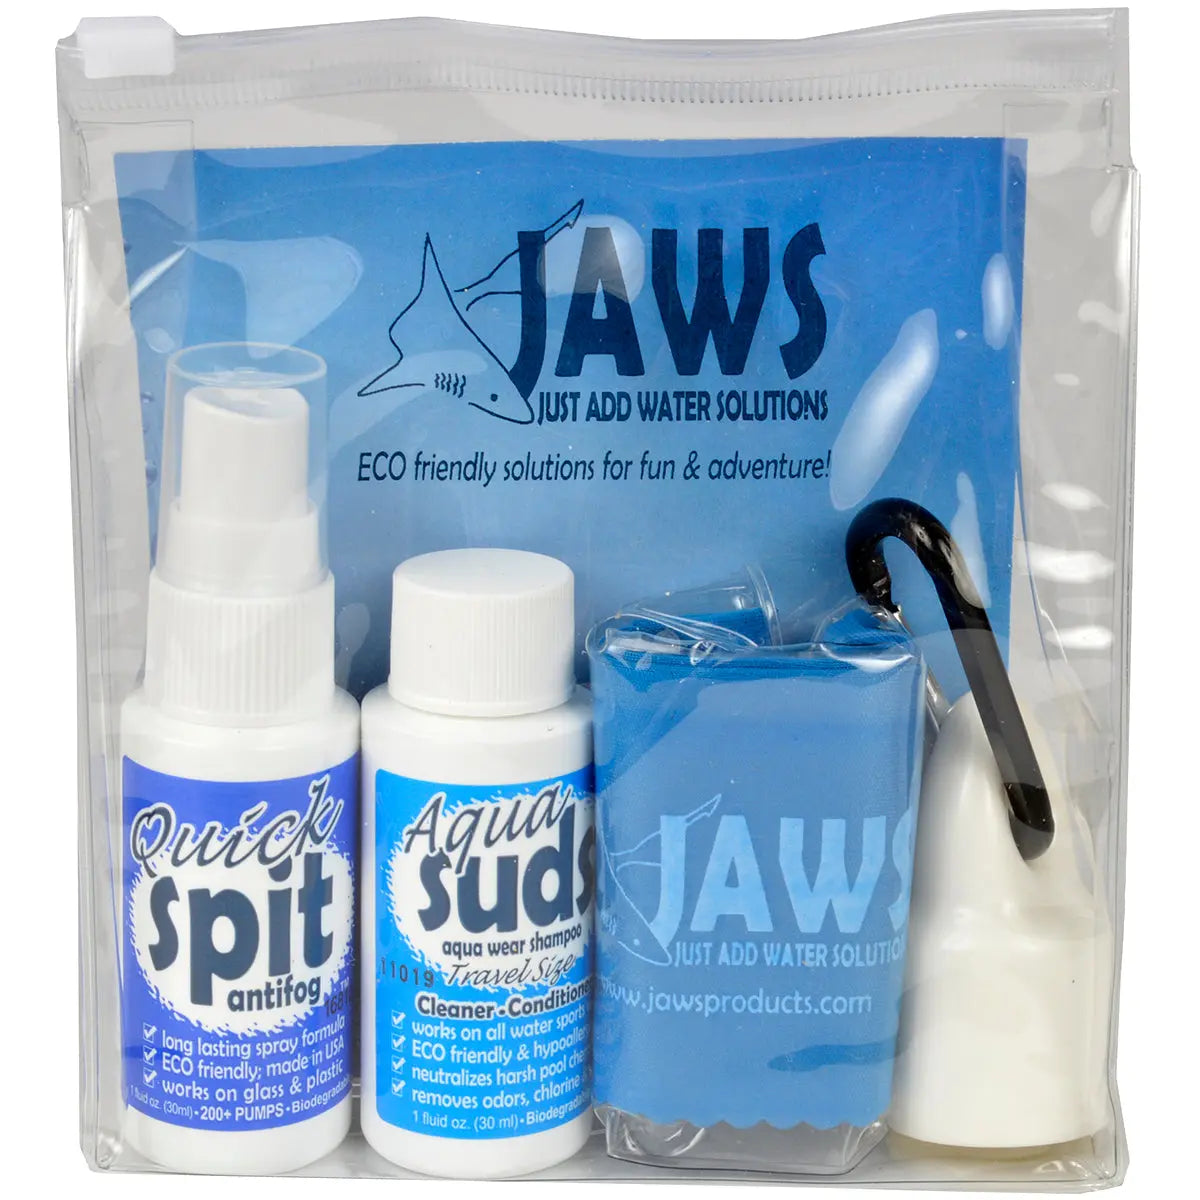 JAWS QuickPACK Drawstring Organizing Backpack with SwimPack Aquatic Care Kit JAWS